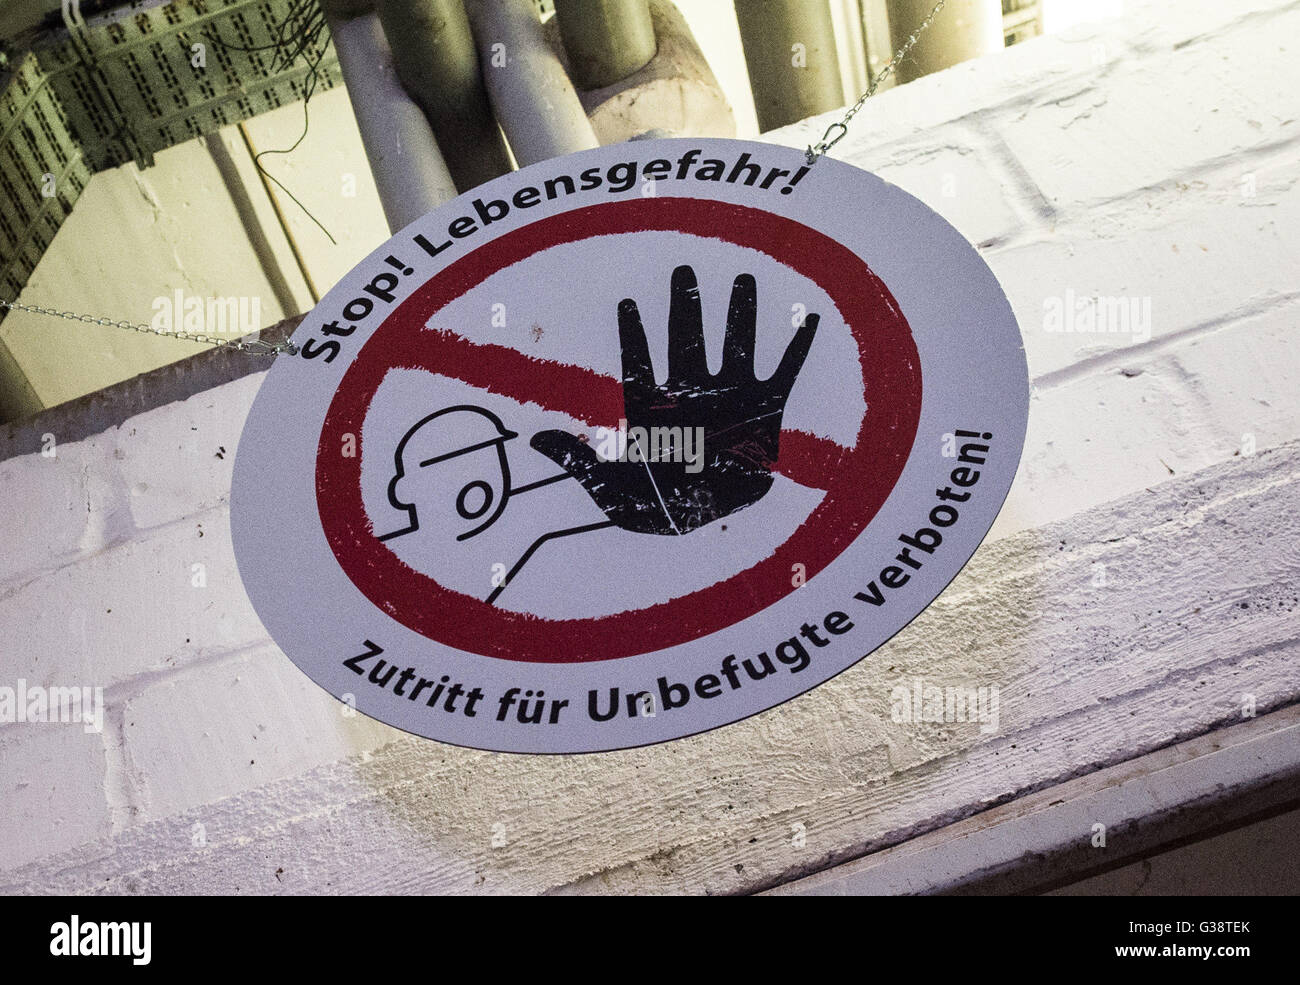 Berlin, Germany. 09th June, 2016. A sign written with 'Stop! Mortal danger! Entry prohibited for unauthorized persons!' hangs in a hall in the elephant enclosure at the Tierpark zoo in Berlin, Germany, 09 June 2016. Photo: SOPHIA KEMBOWSKI/dpa/Alamy Live News Stock Photo